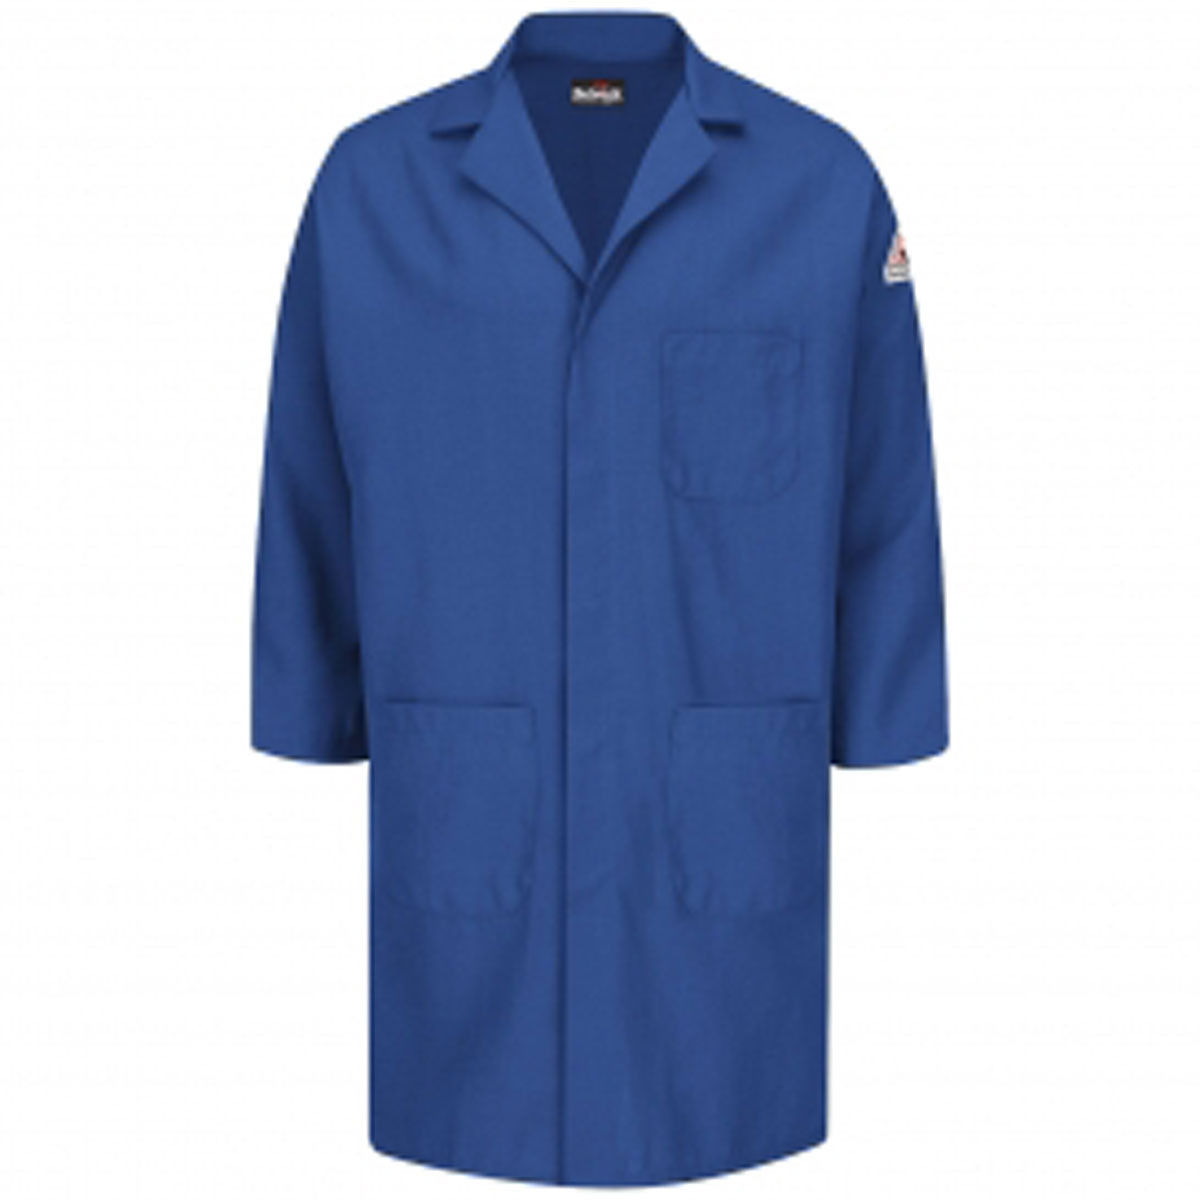 How should I care for this Bulwark KNL6RB lab coat?